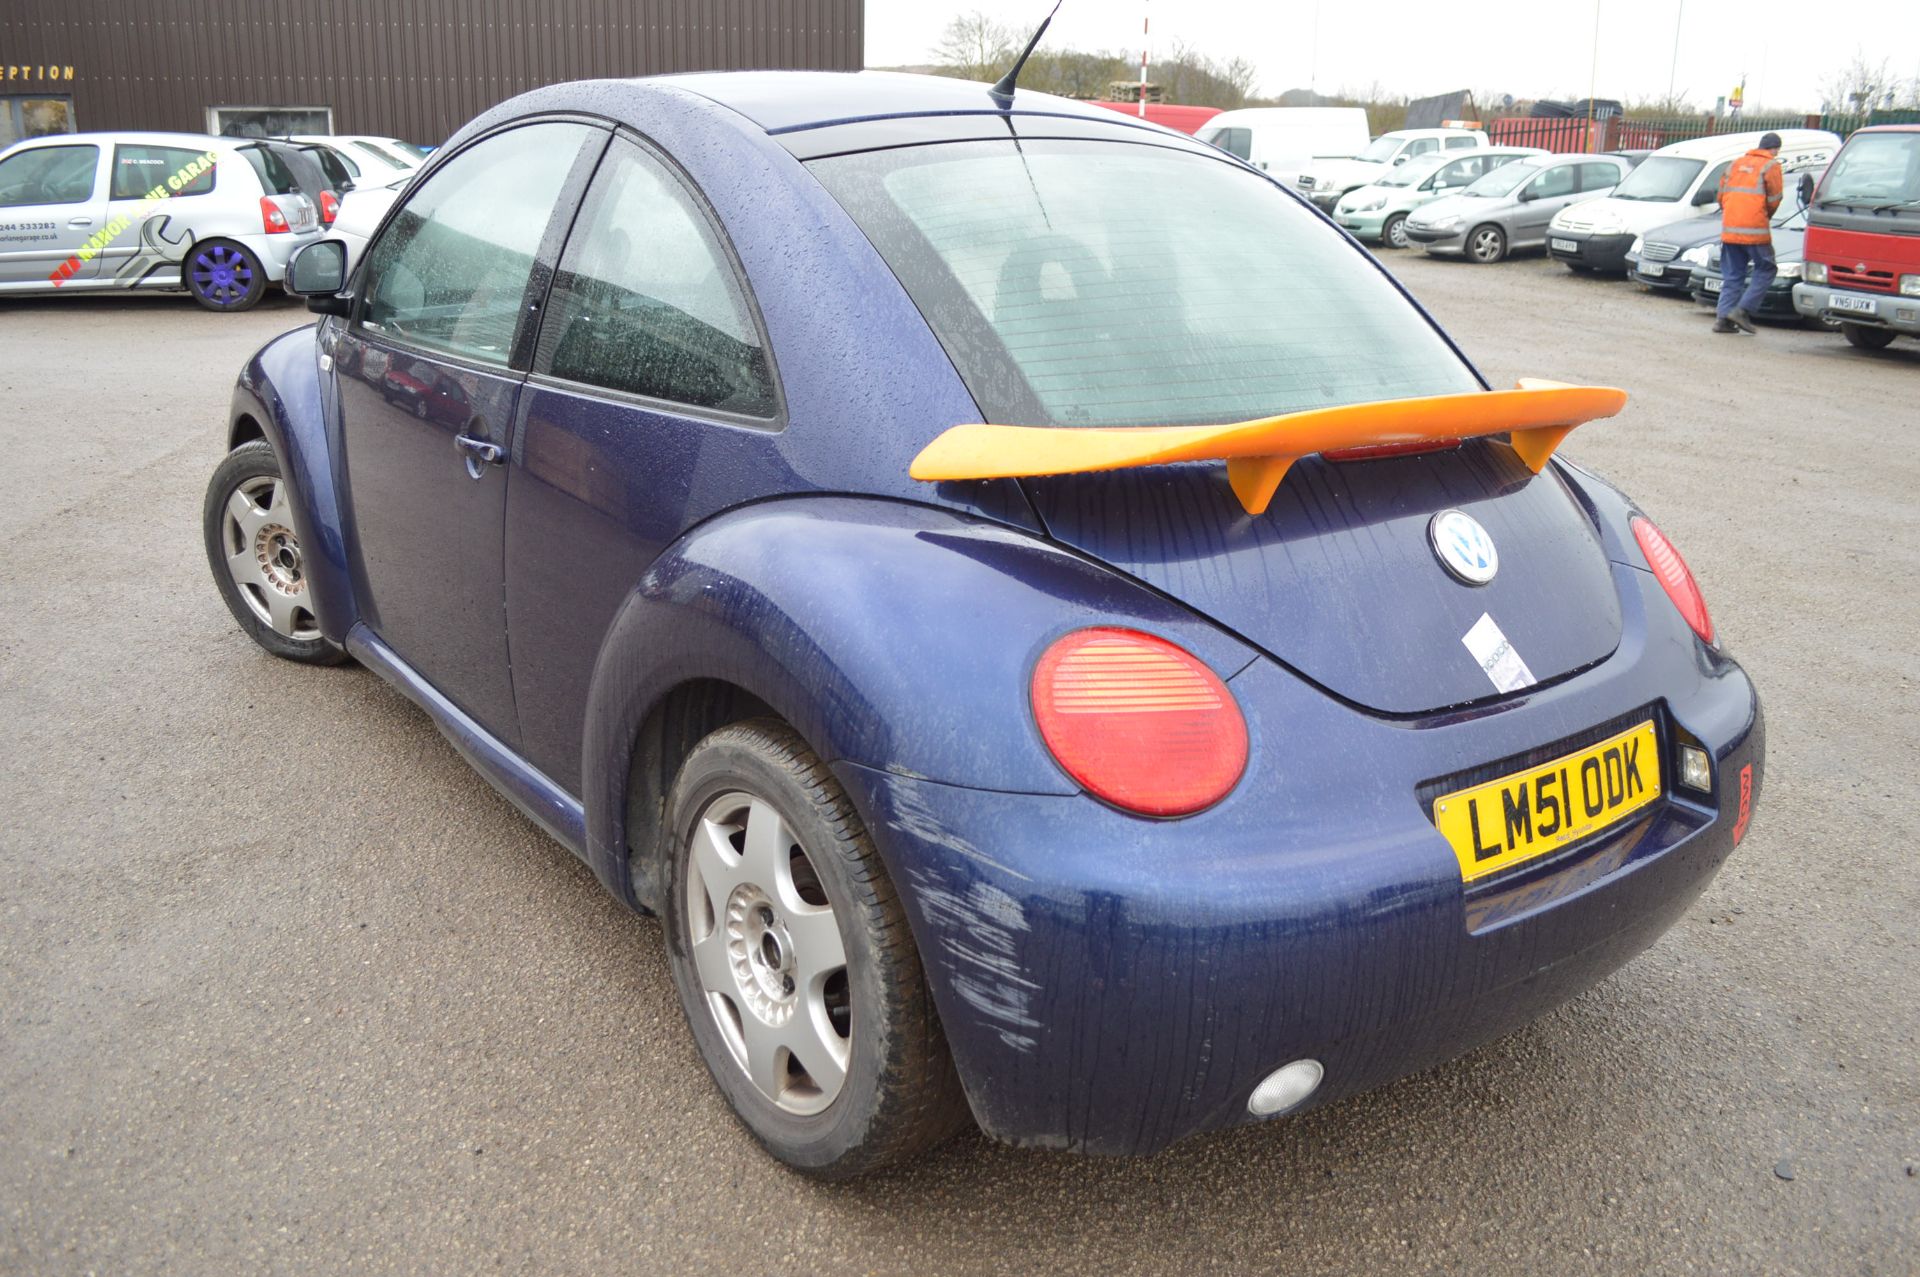 2001/51 REG VOLKSWAGEN BEETLE TURBO 1.8 TRACK CAR 5 SPEED MANUAL GOOD STRONG ENGINE AND BOX HAS JUST - Image 4 of 15